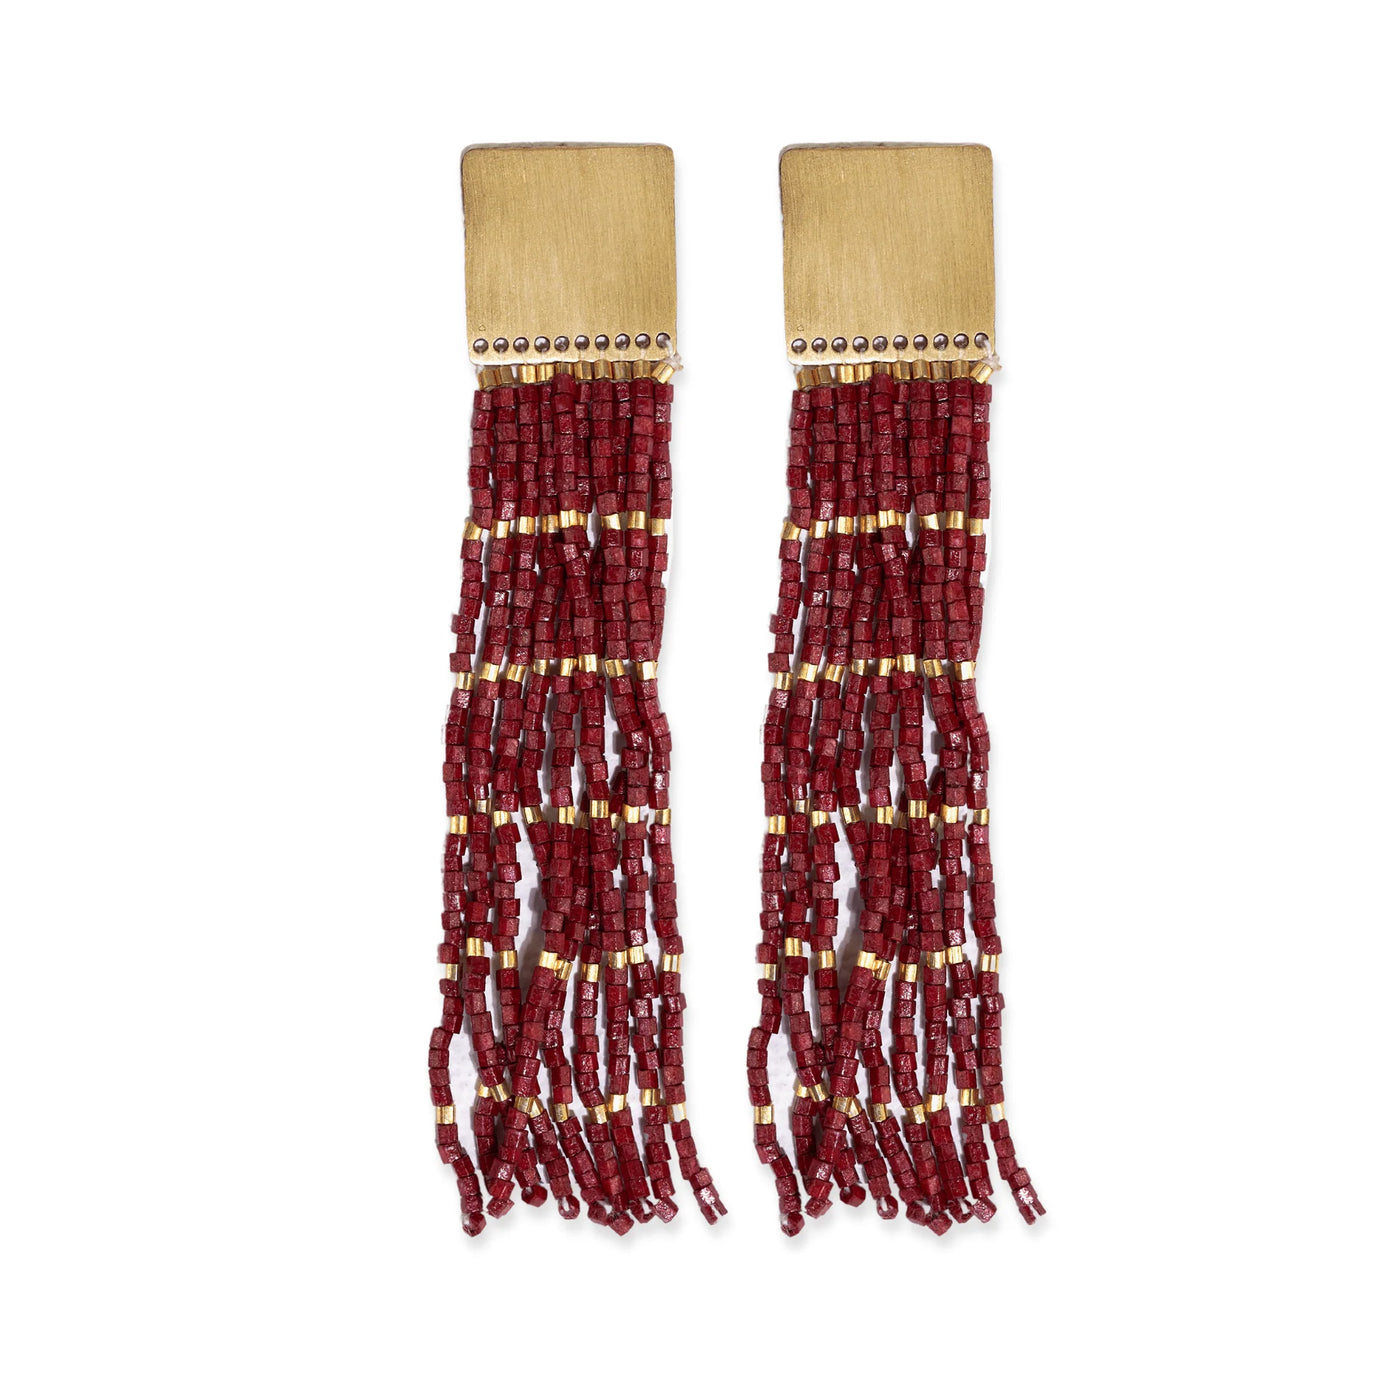 Ink & Alloy Harlow Brass Top Solid With Gold Stripe Beaded Fringe Earrings Maroon Wholesale